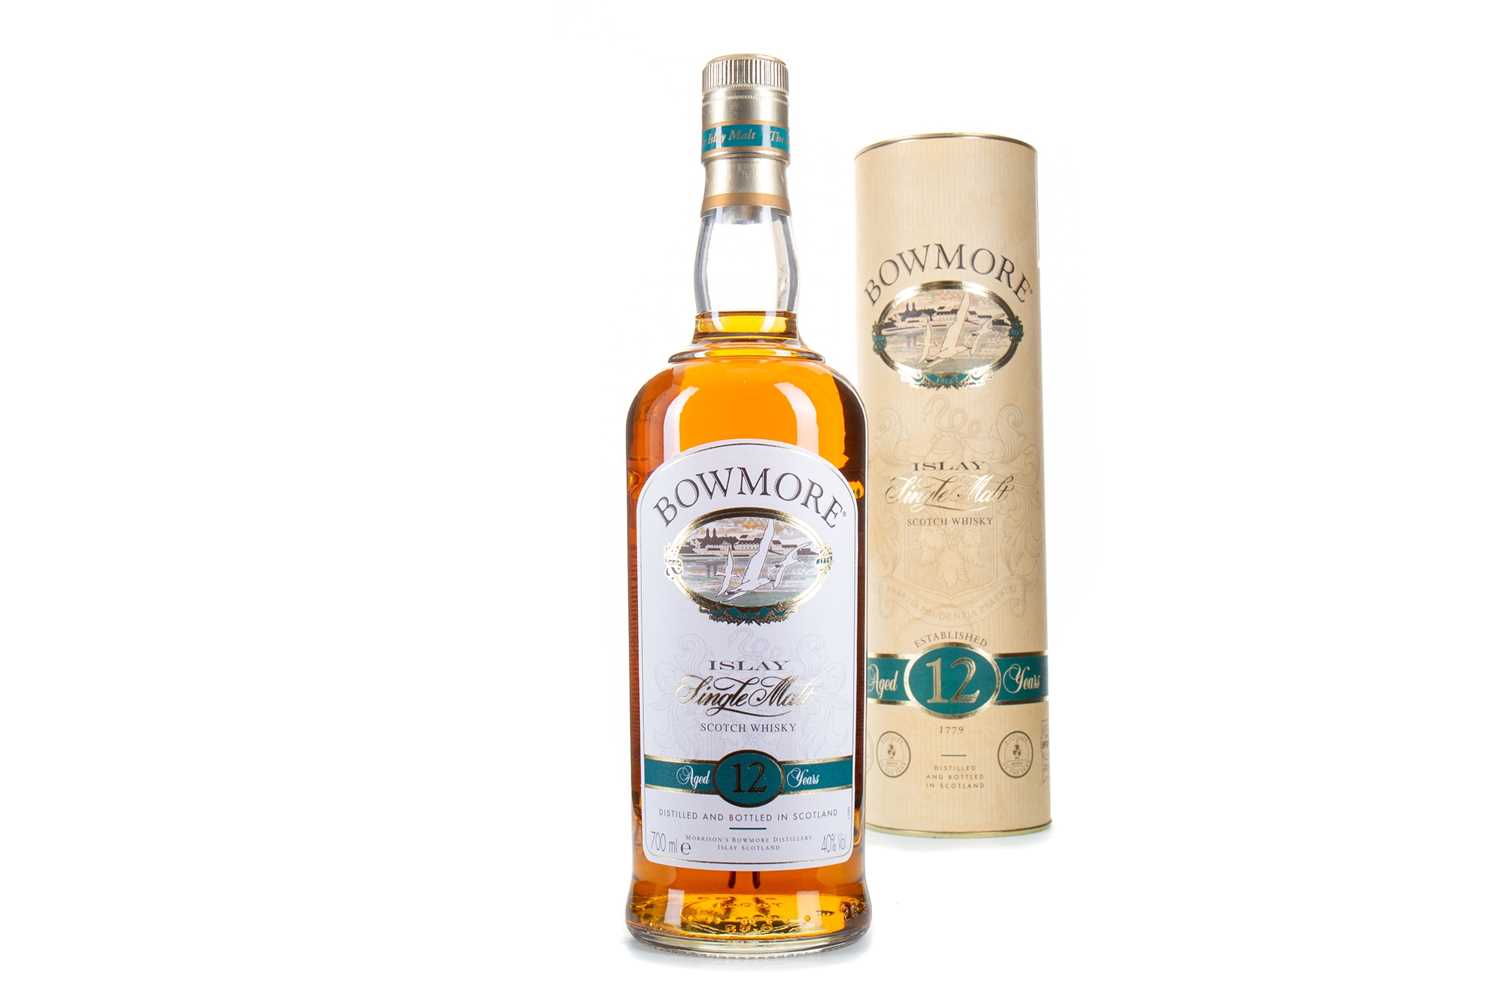 Lot 176 - BOWMORE 12 YEAR OLD